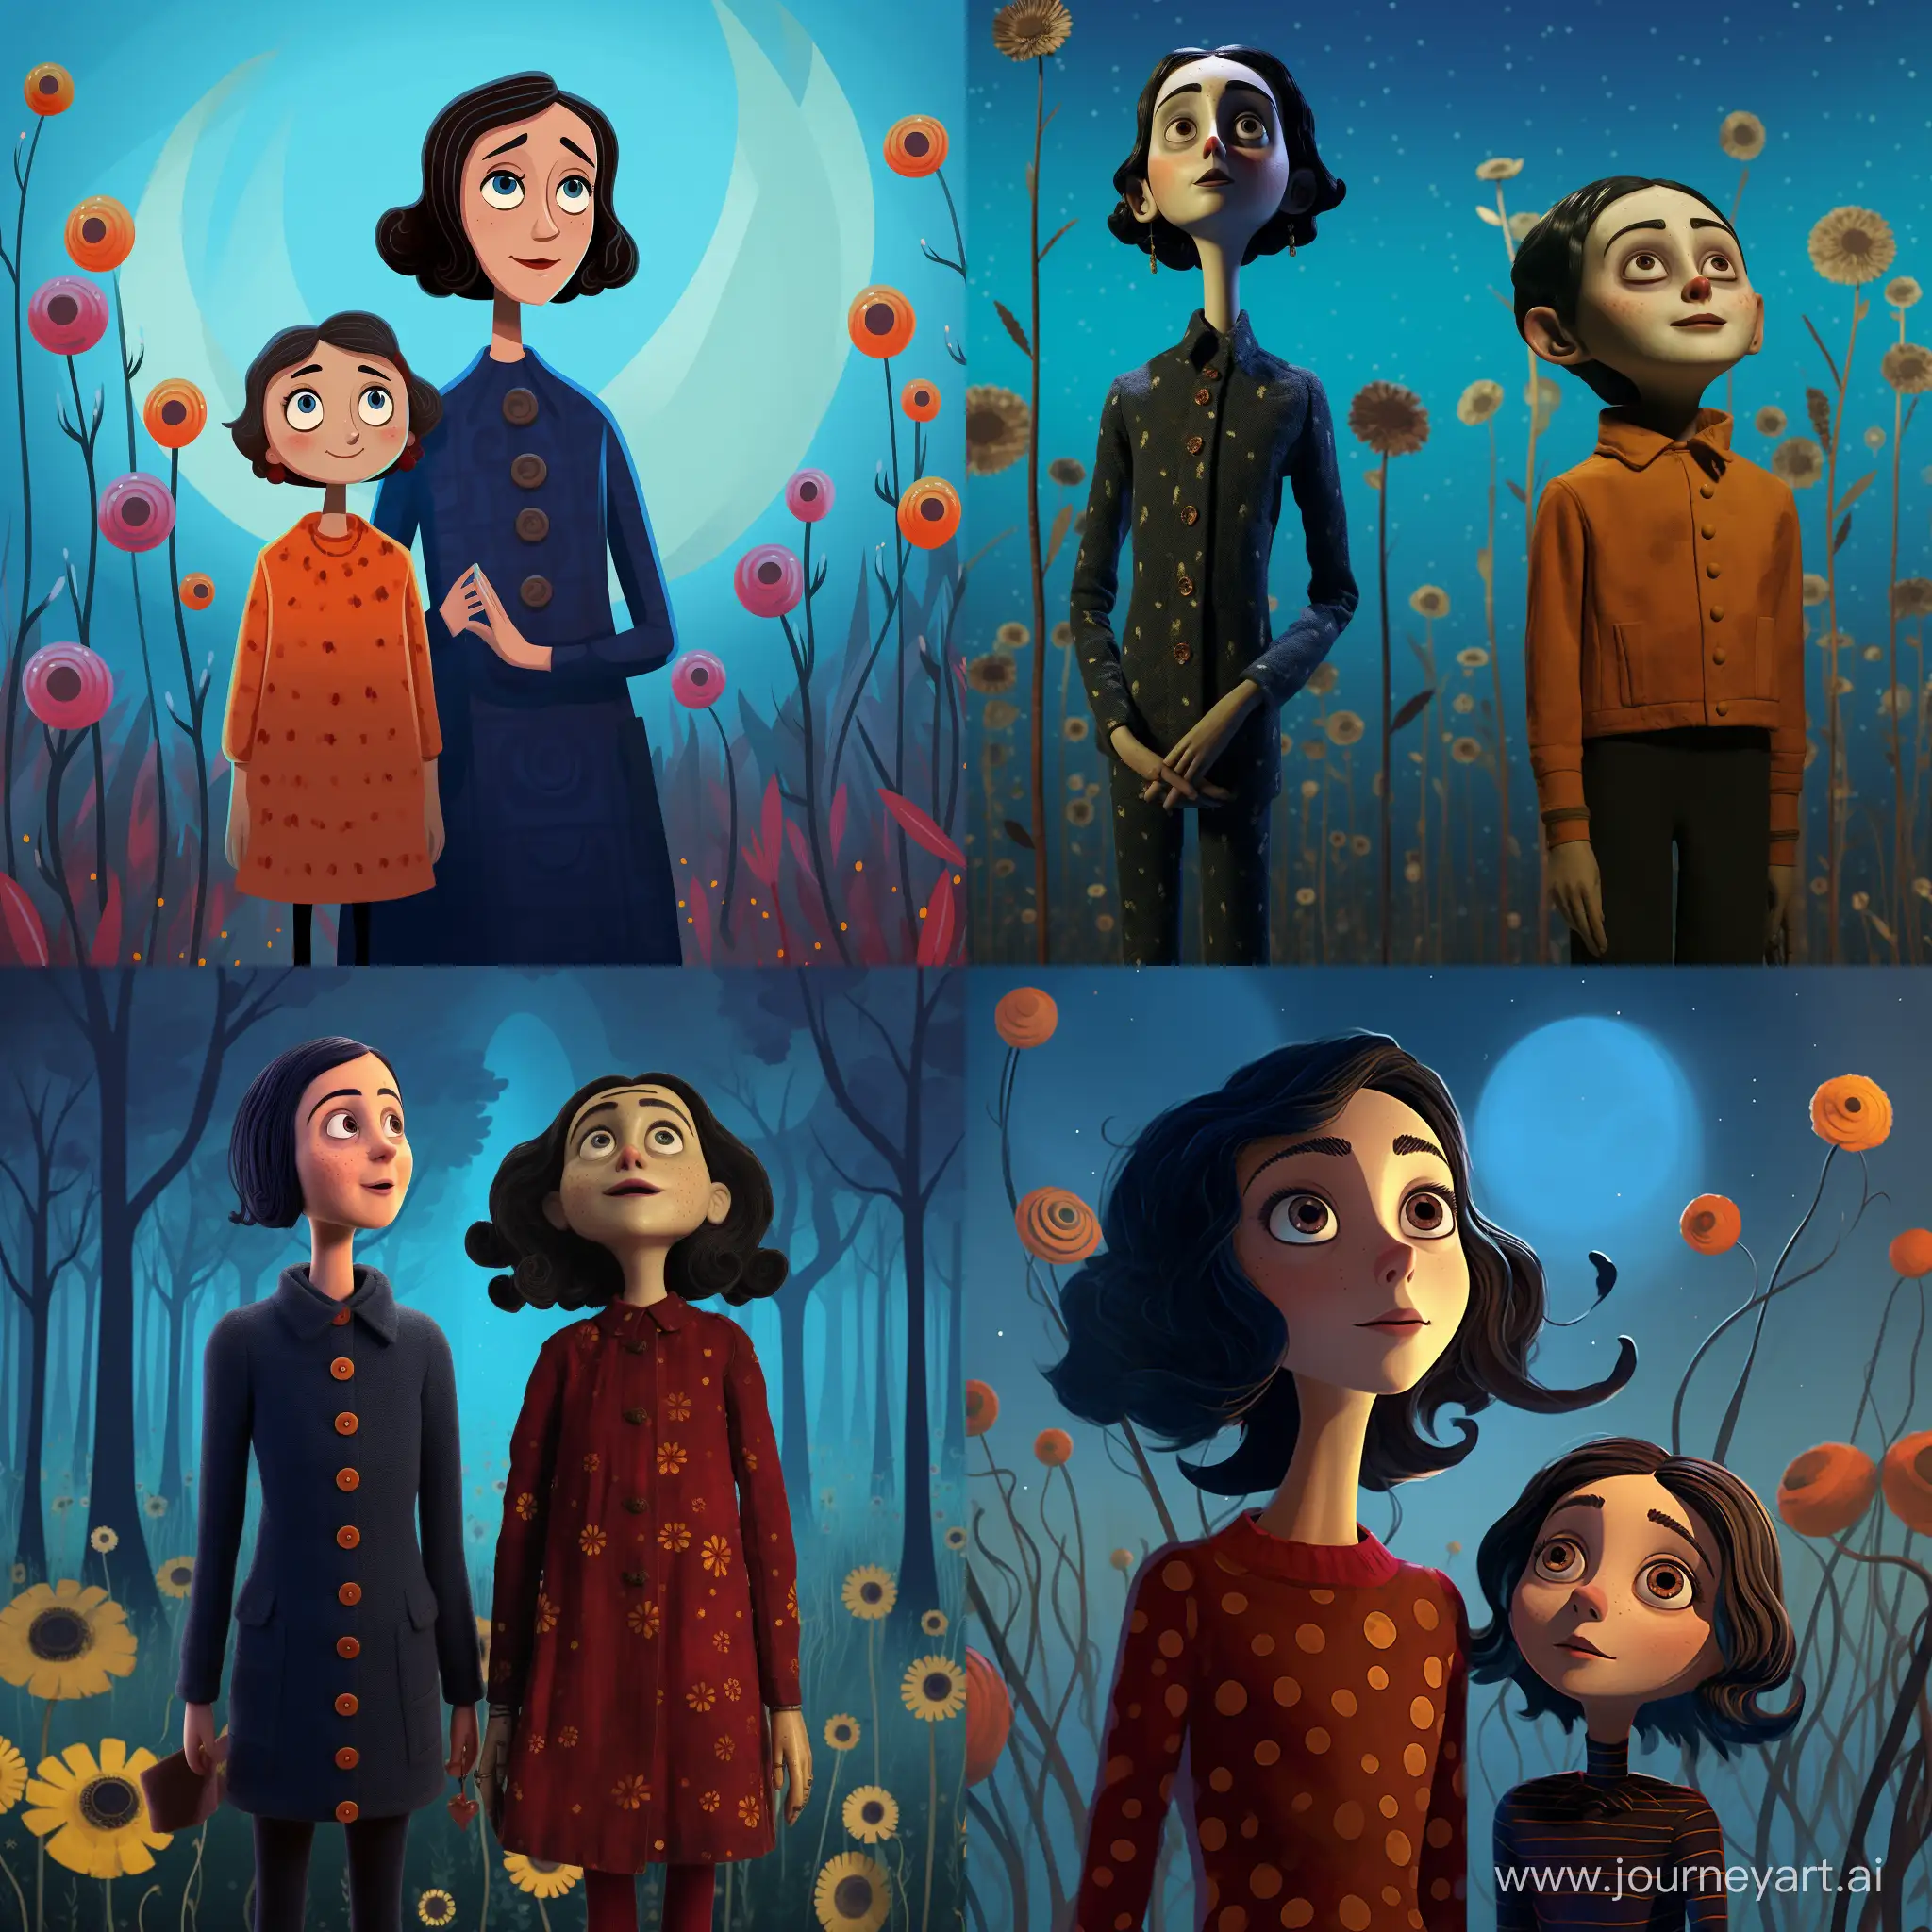 Mom from Coraline in the land of nightmares with buttons instead of eyes tall next to her in the garden from Coraline